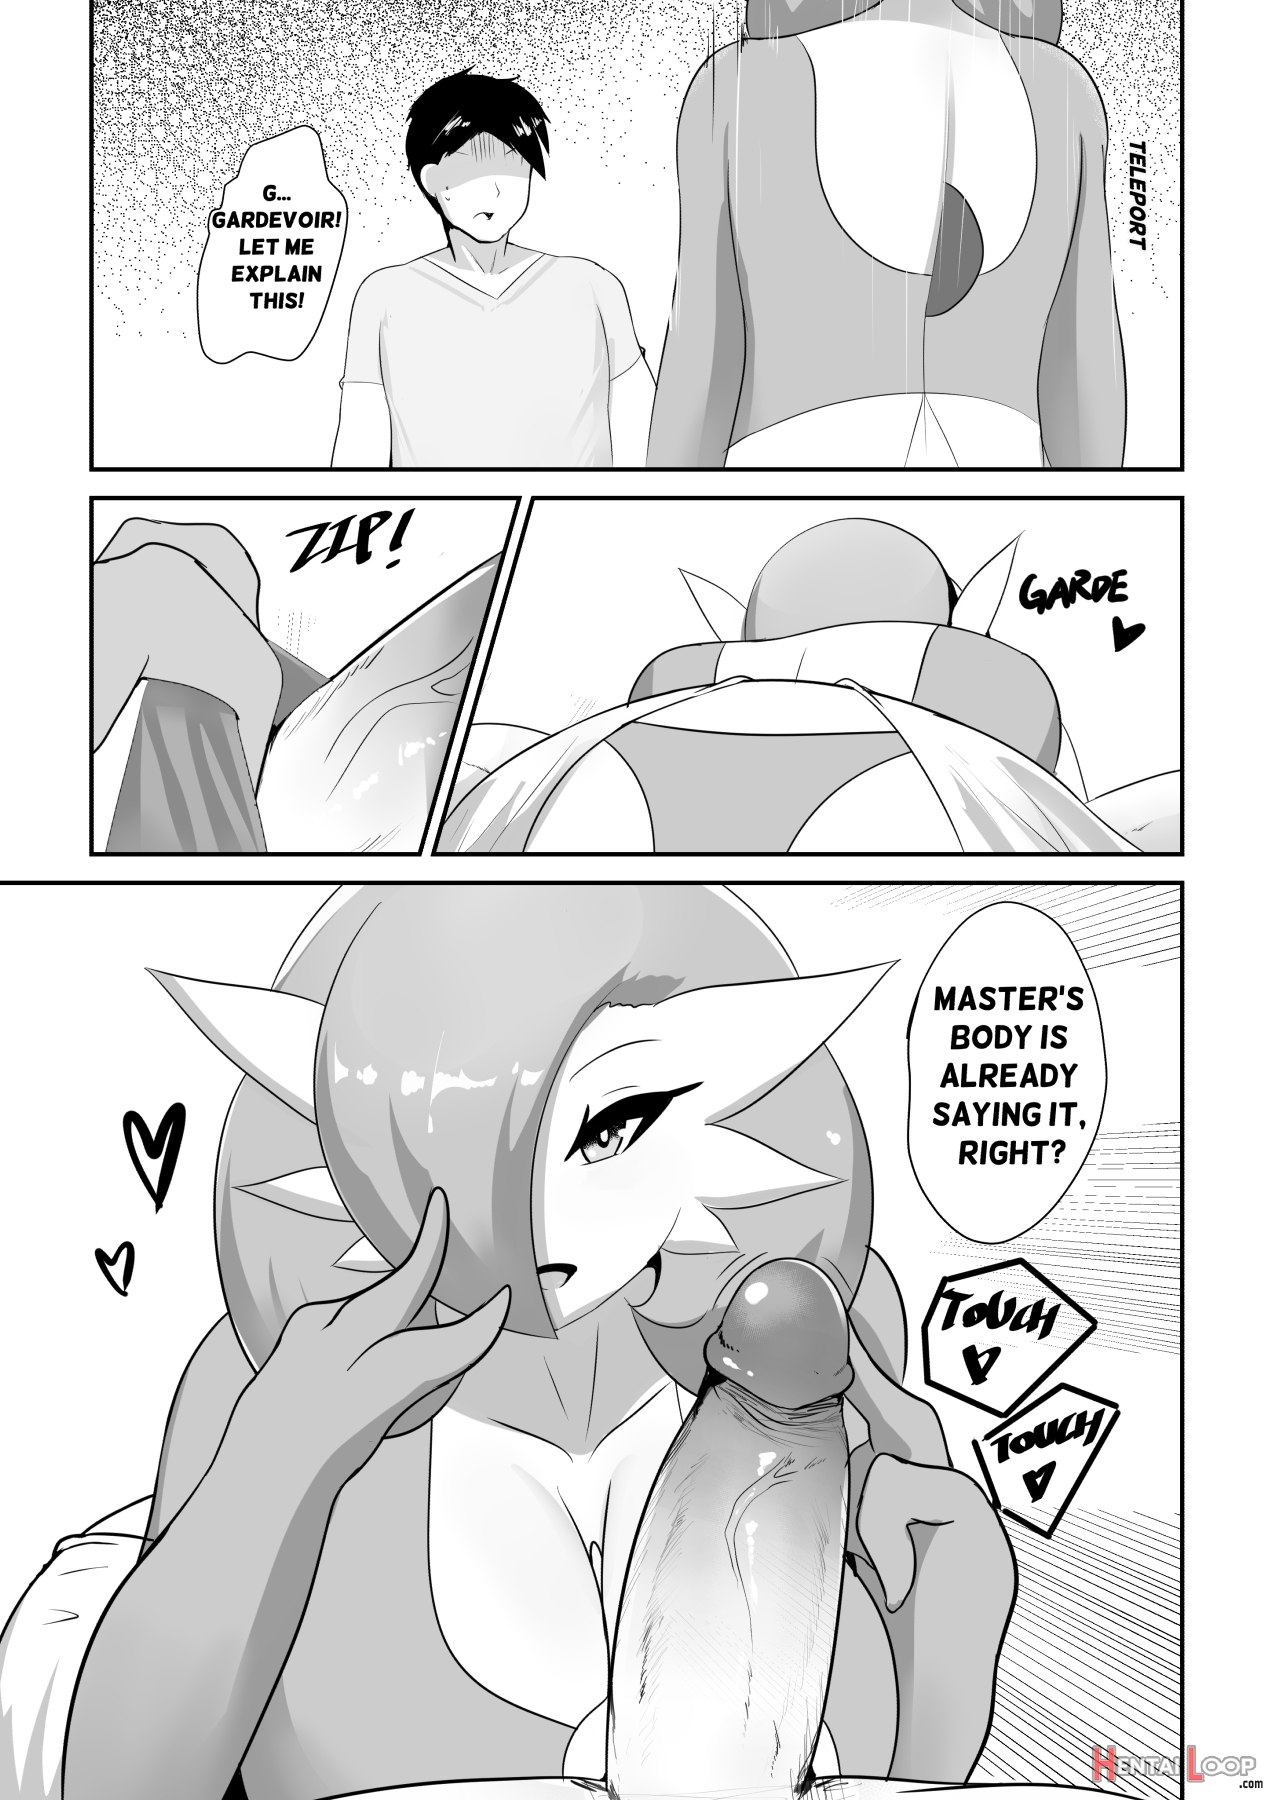 Love To Gardevoir page 4